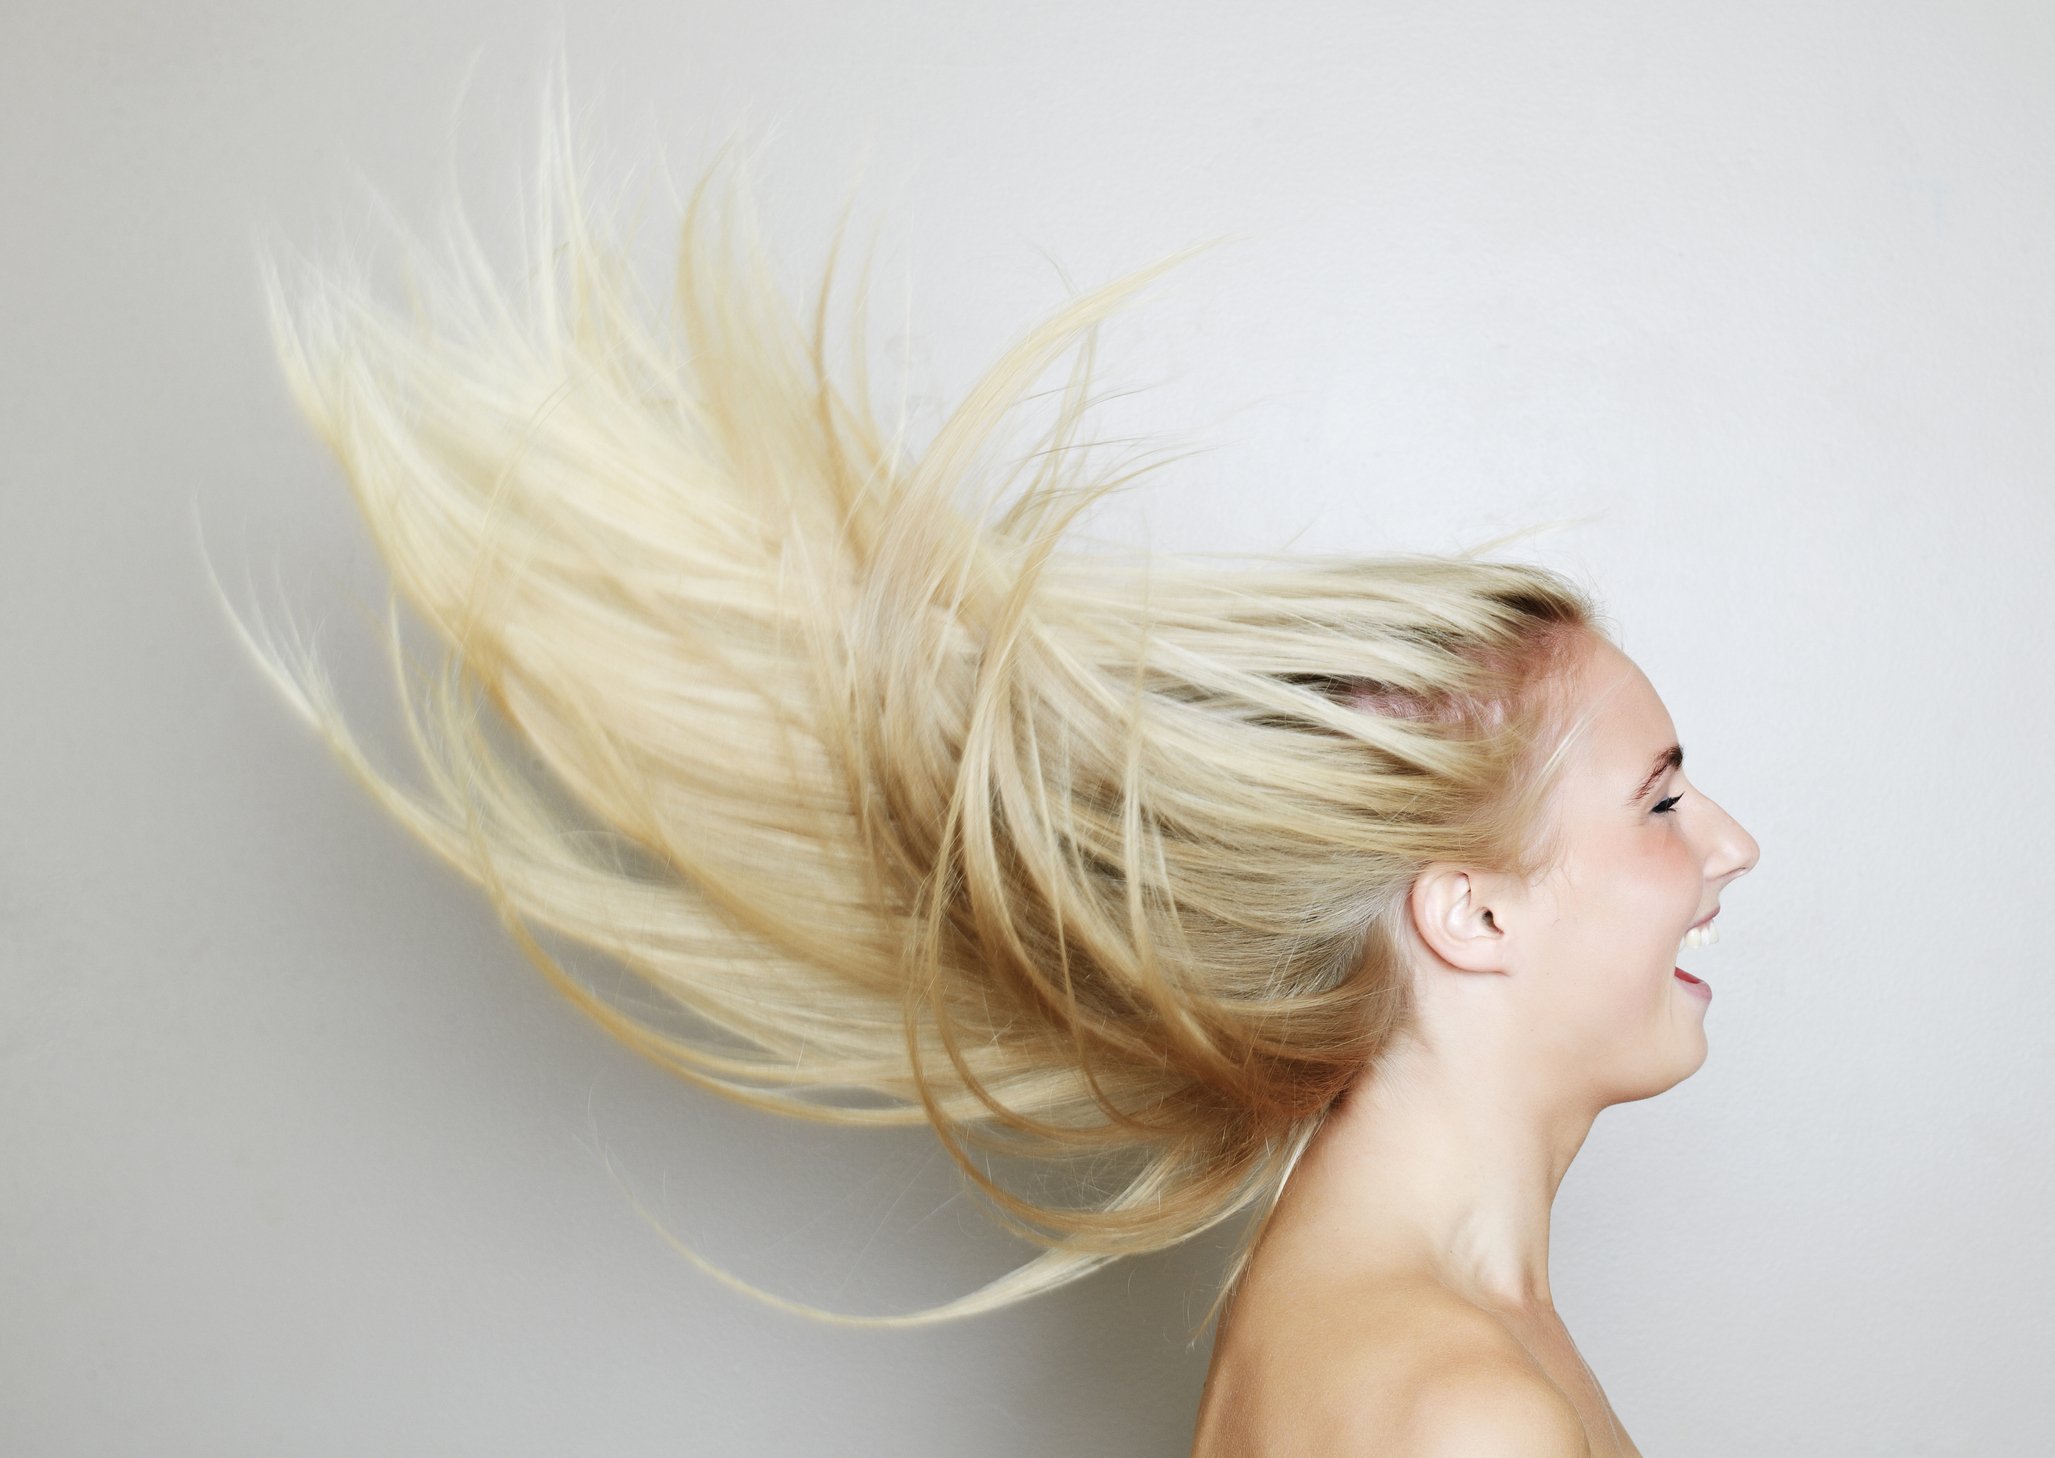 Blonde hair blowing in the wind - wide 5